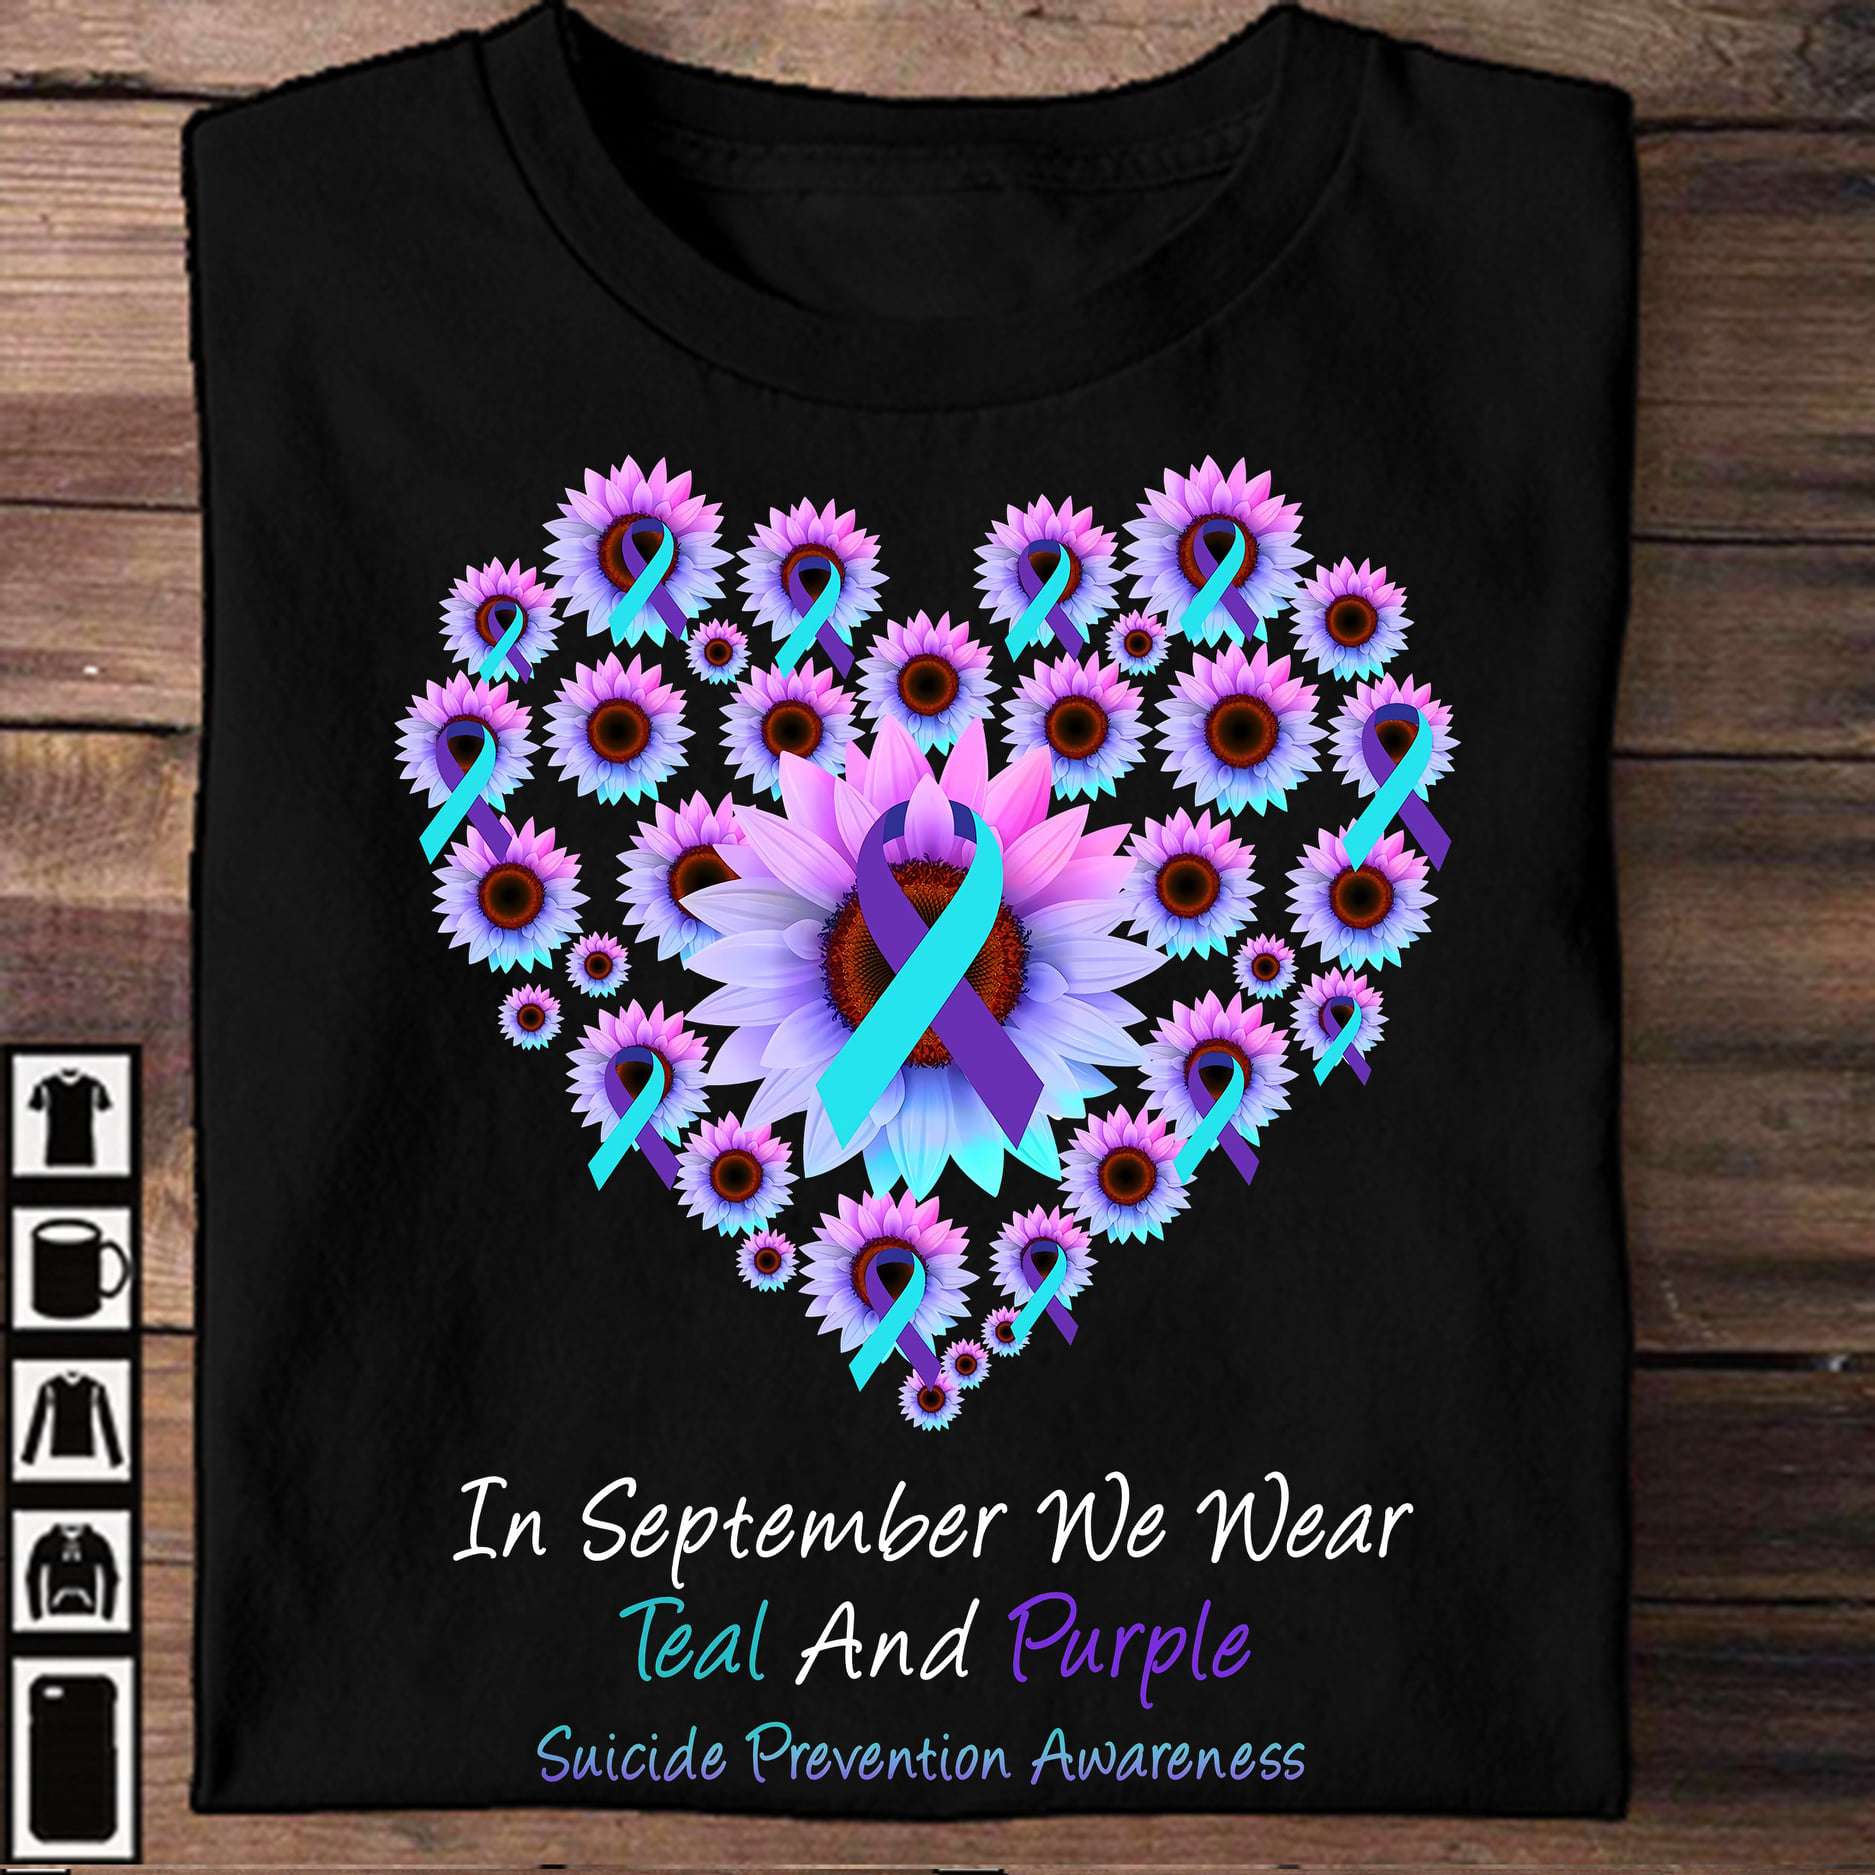 Suicide Prevention Sunflower - In september we wear teal and purple suicide prevention awareness